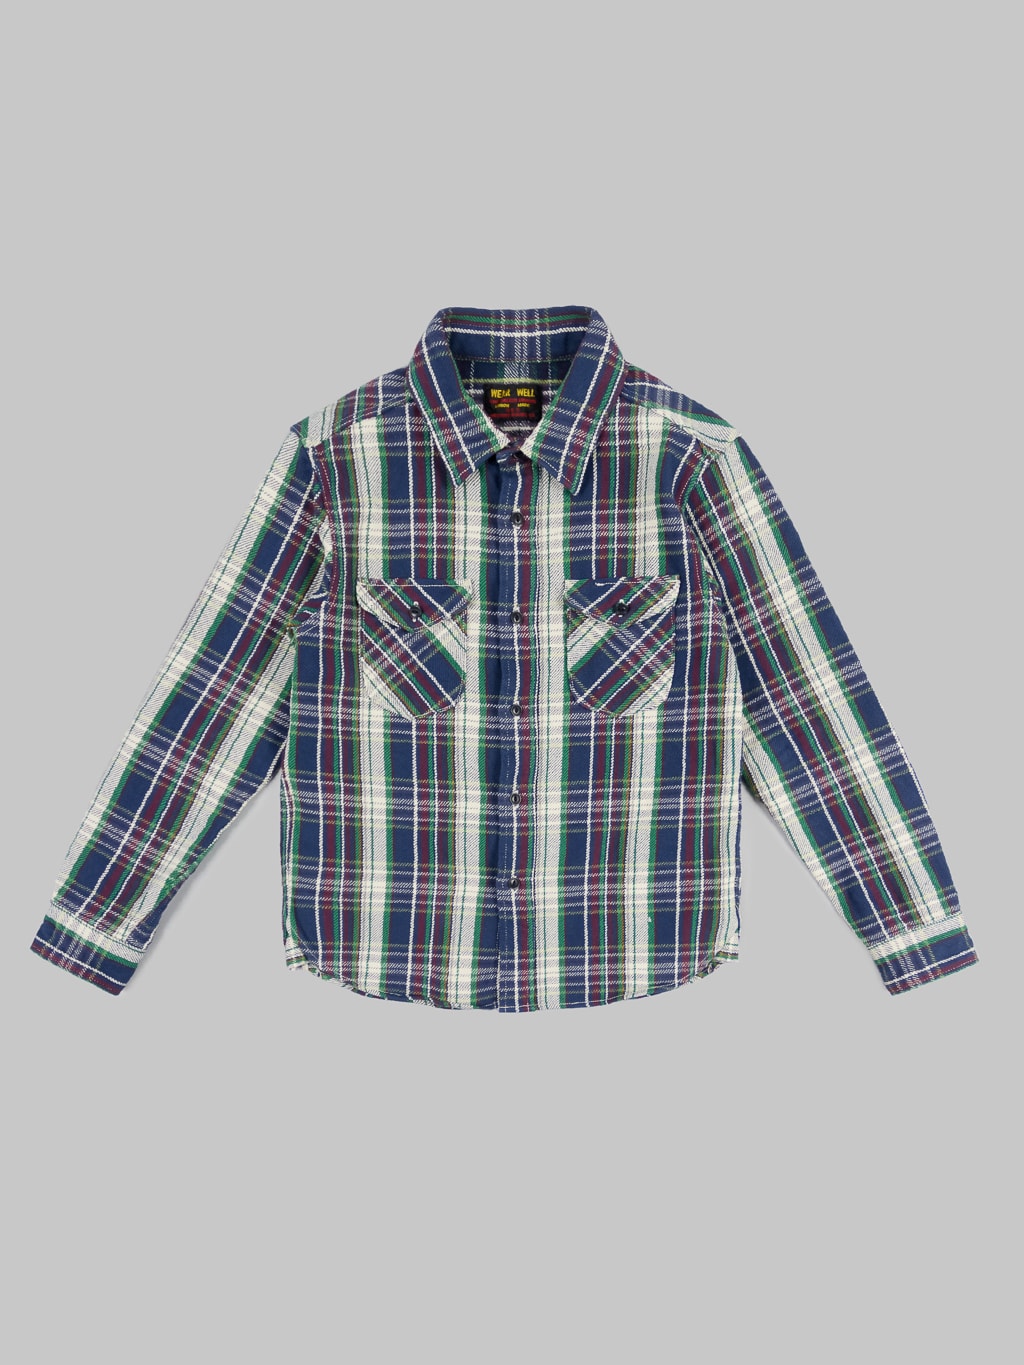 UES Heavy Flannel Shirt navy green made in japan